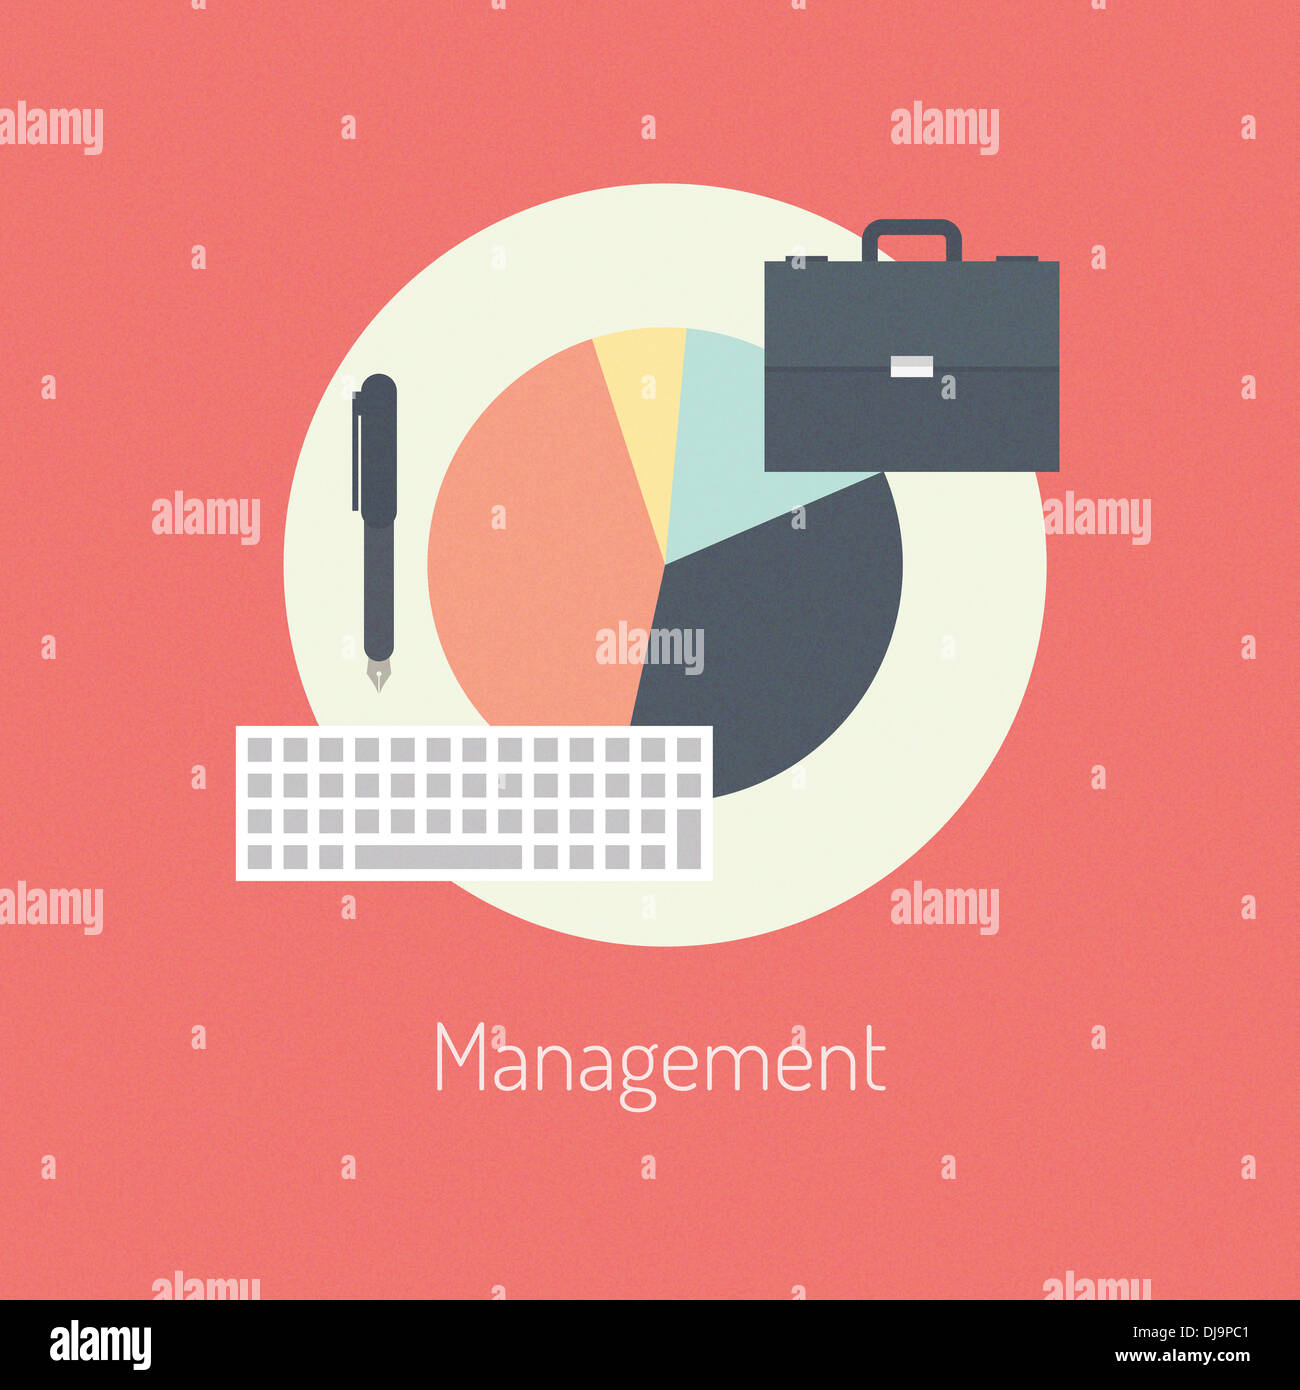 Flat design modern vector illustration concept of poster on business management or finance workflow theme Stock Photo